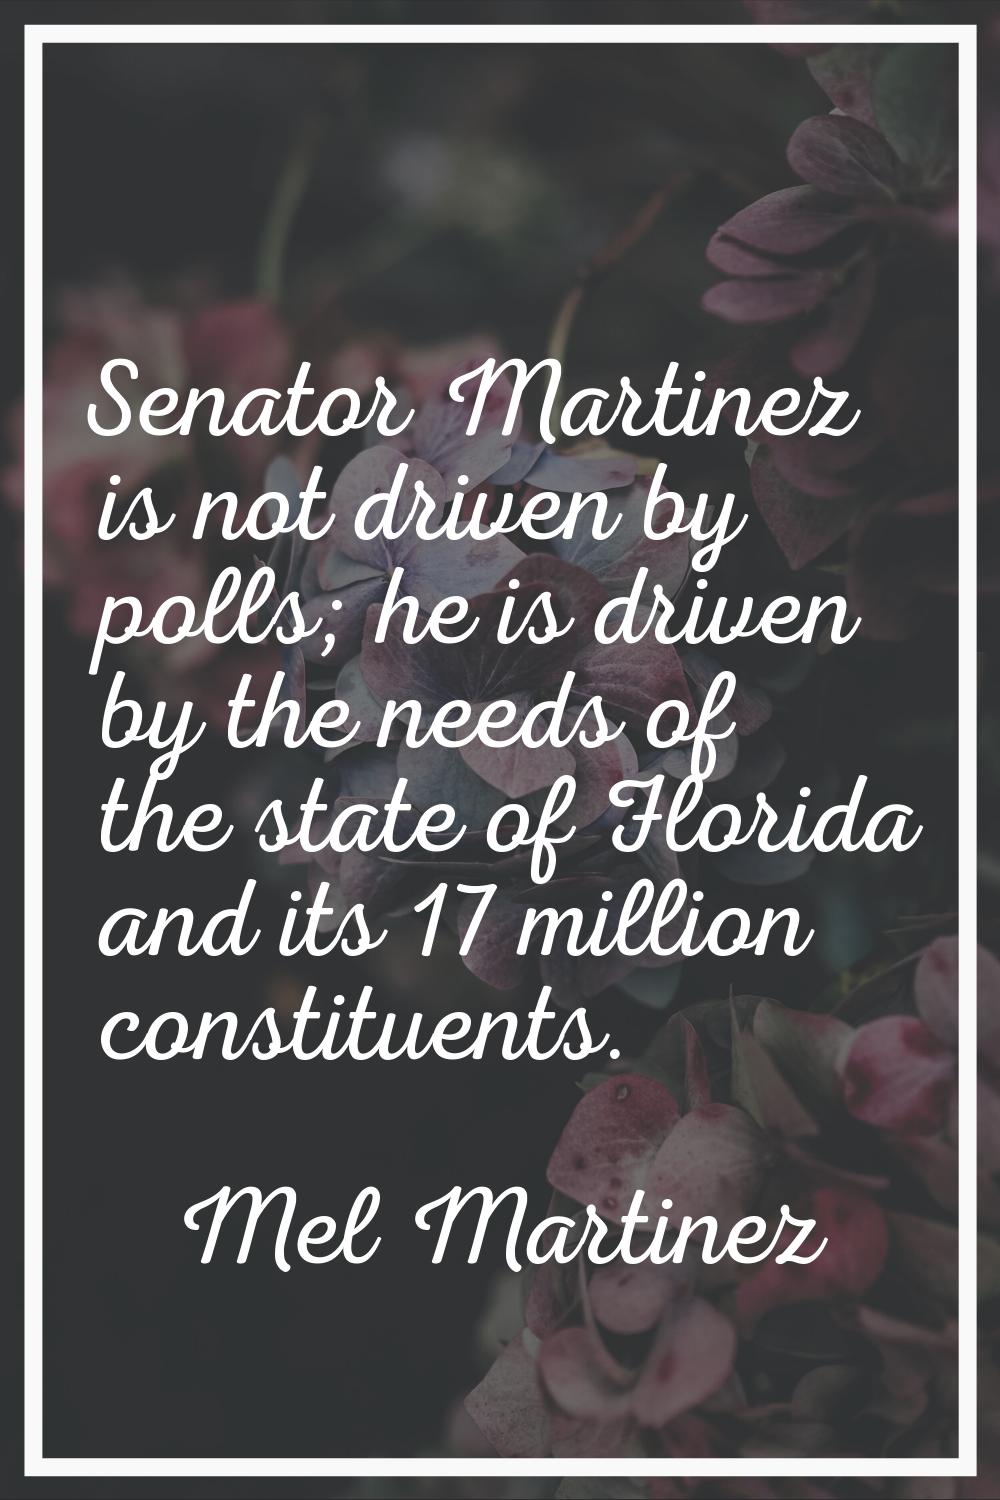 Senator Martinez is not driven by polls; he is driven by the needs of the state of Florida and its 